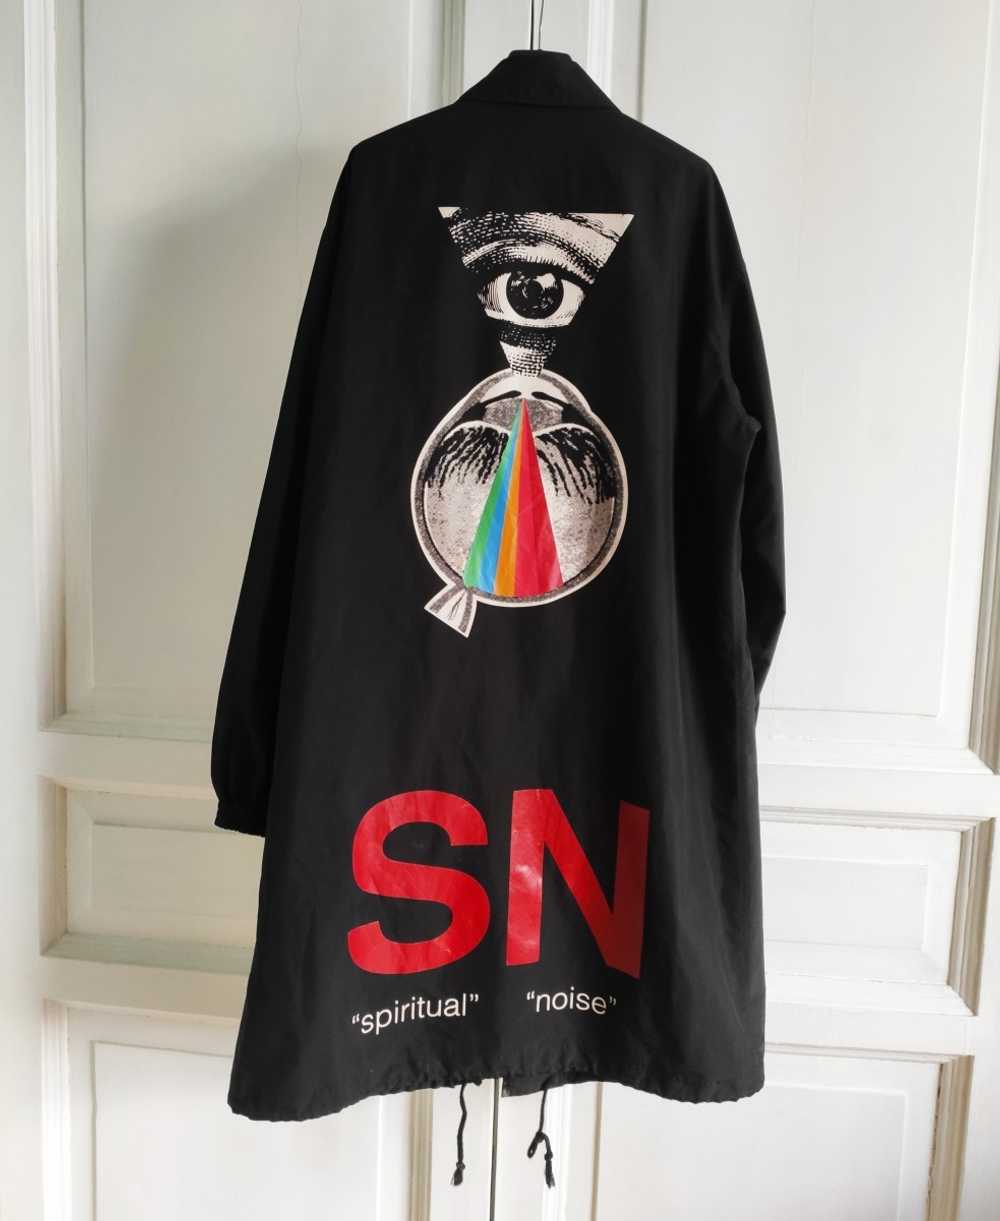 UNDERCOVER GRAIL! SS18 Spiritual noise printed ra… - image 4